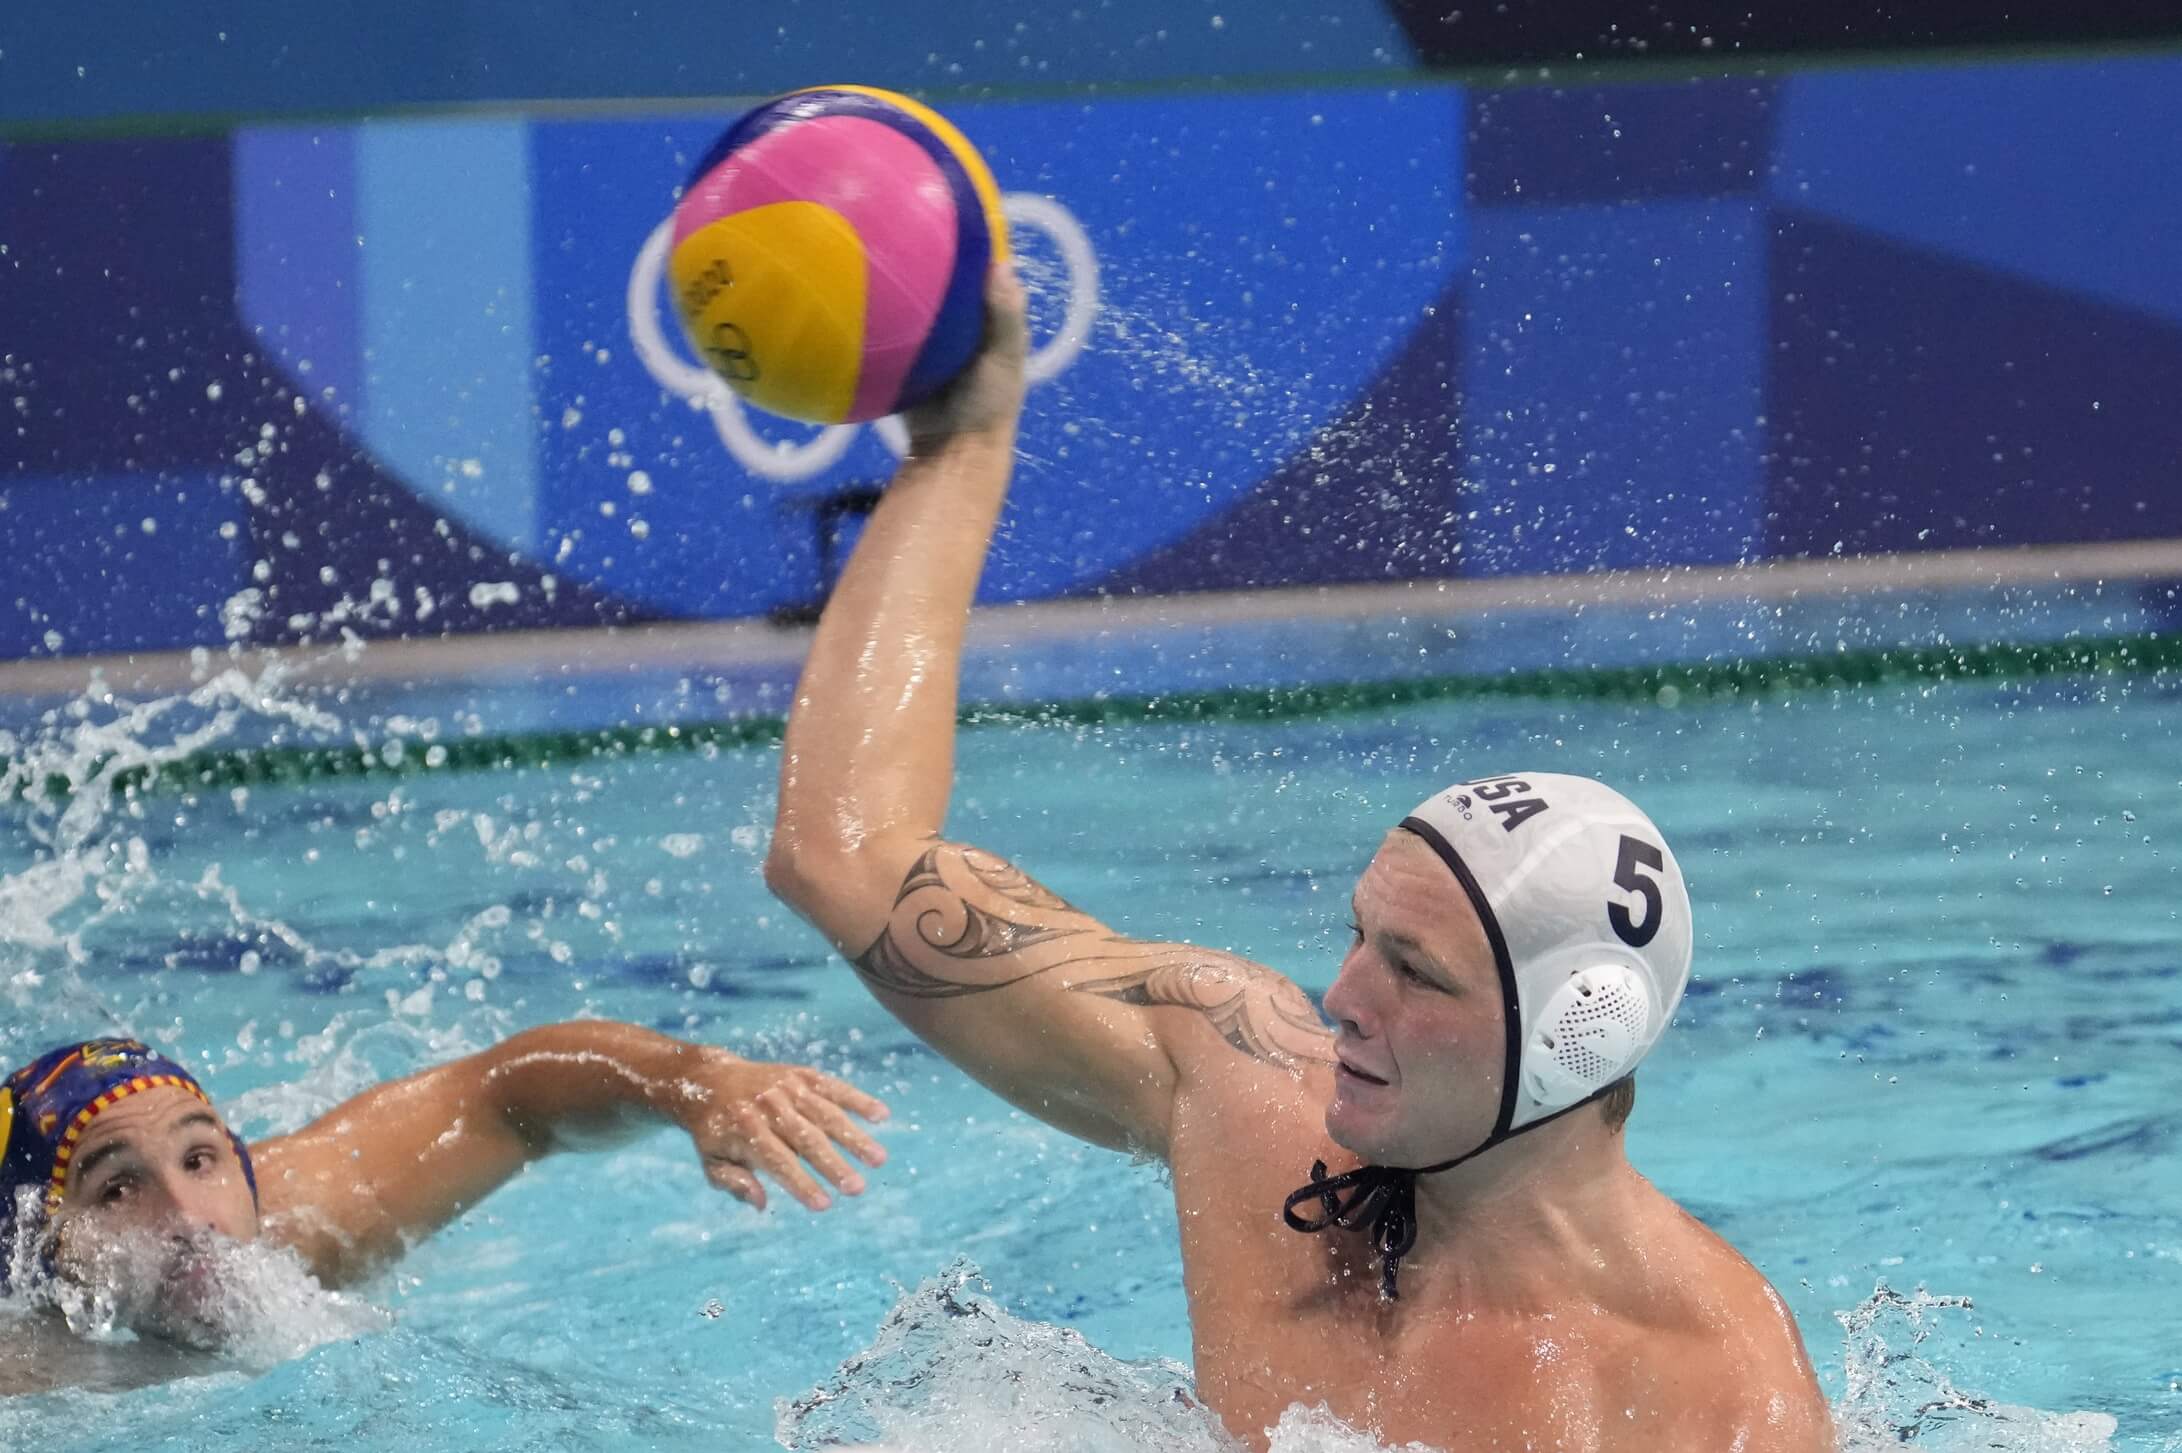 Aug 4, 2021; Tokyo, Japan; Team United States driver Hannes Daube (5) throws the ball against Spain in a men's water polo quarterfinal during the Tokyo 2020 Olympic Summer Games at Tatsumi Water Polo Centre. Mandatory Credit: Robert Hanashiro-USA TODAY Sports